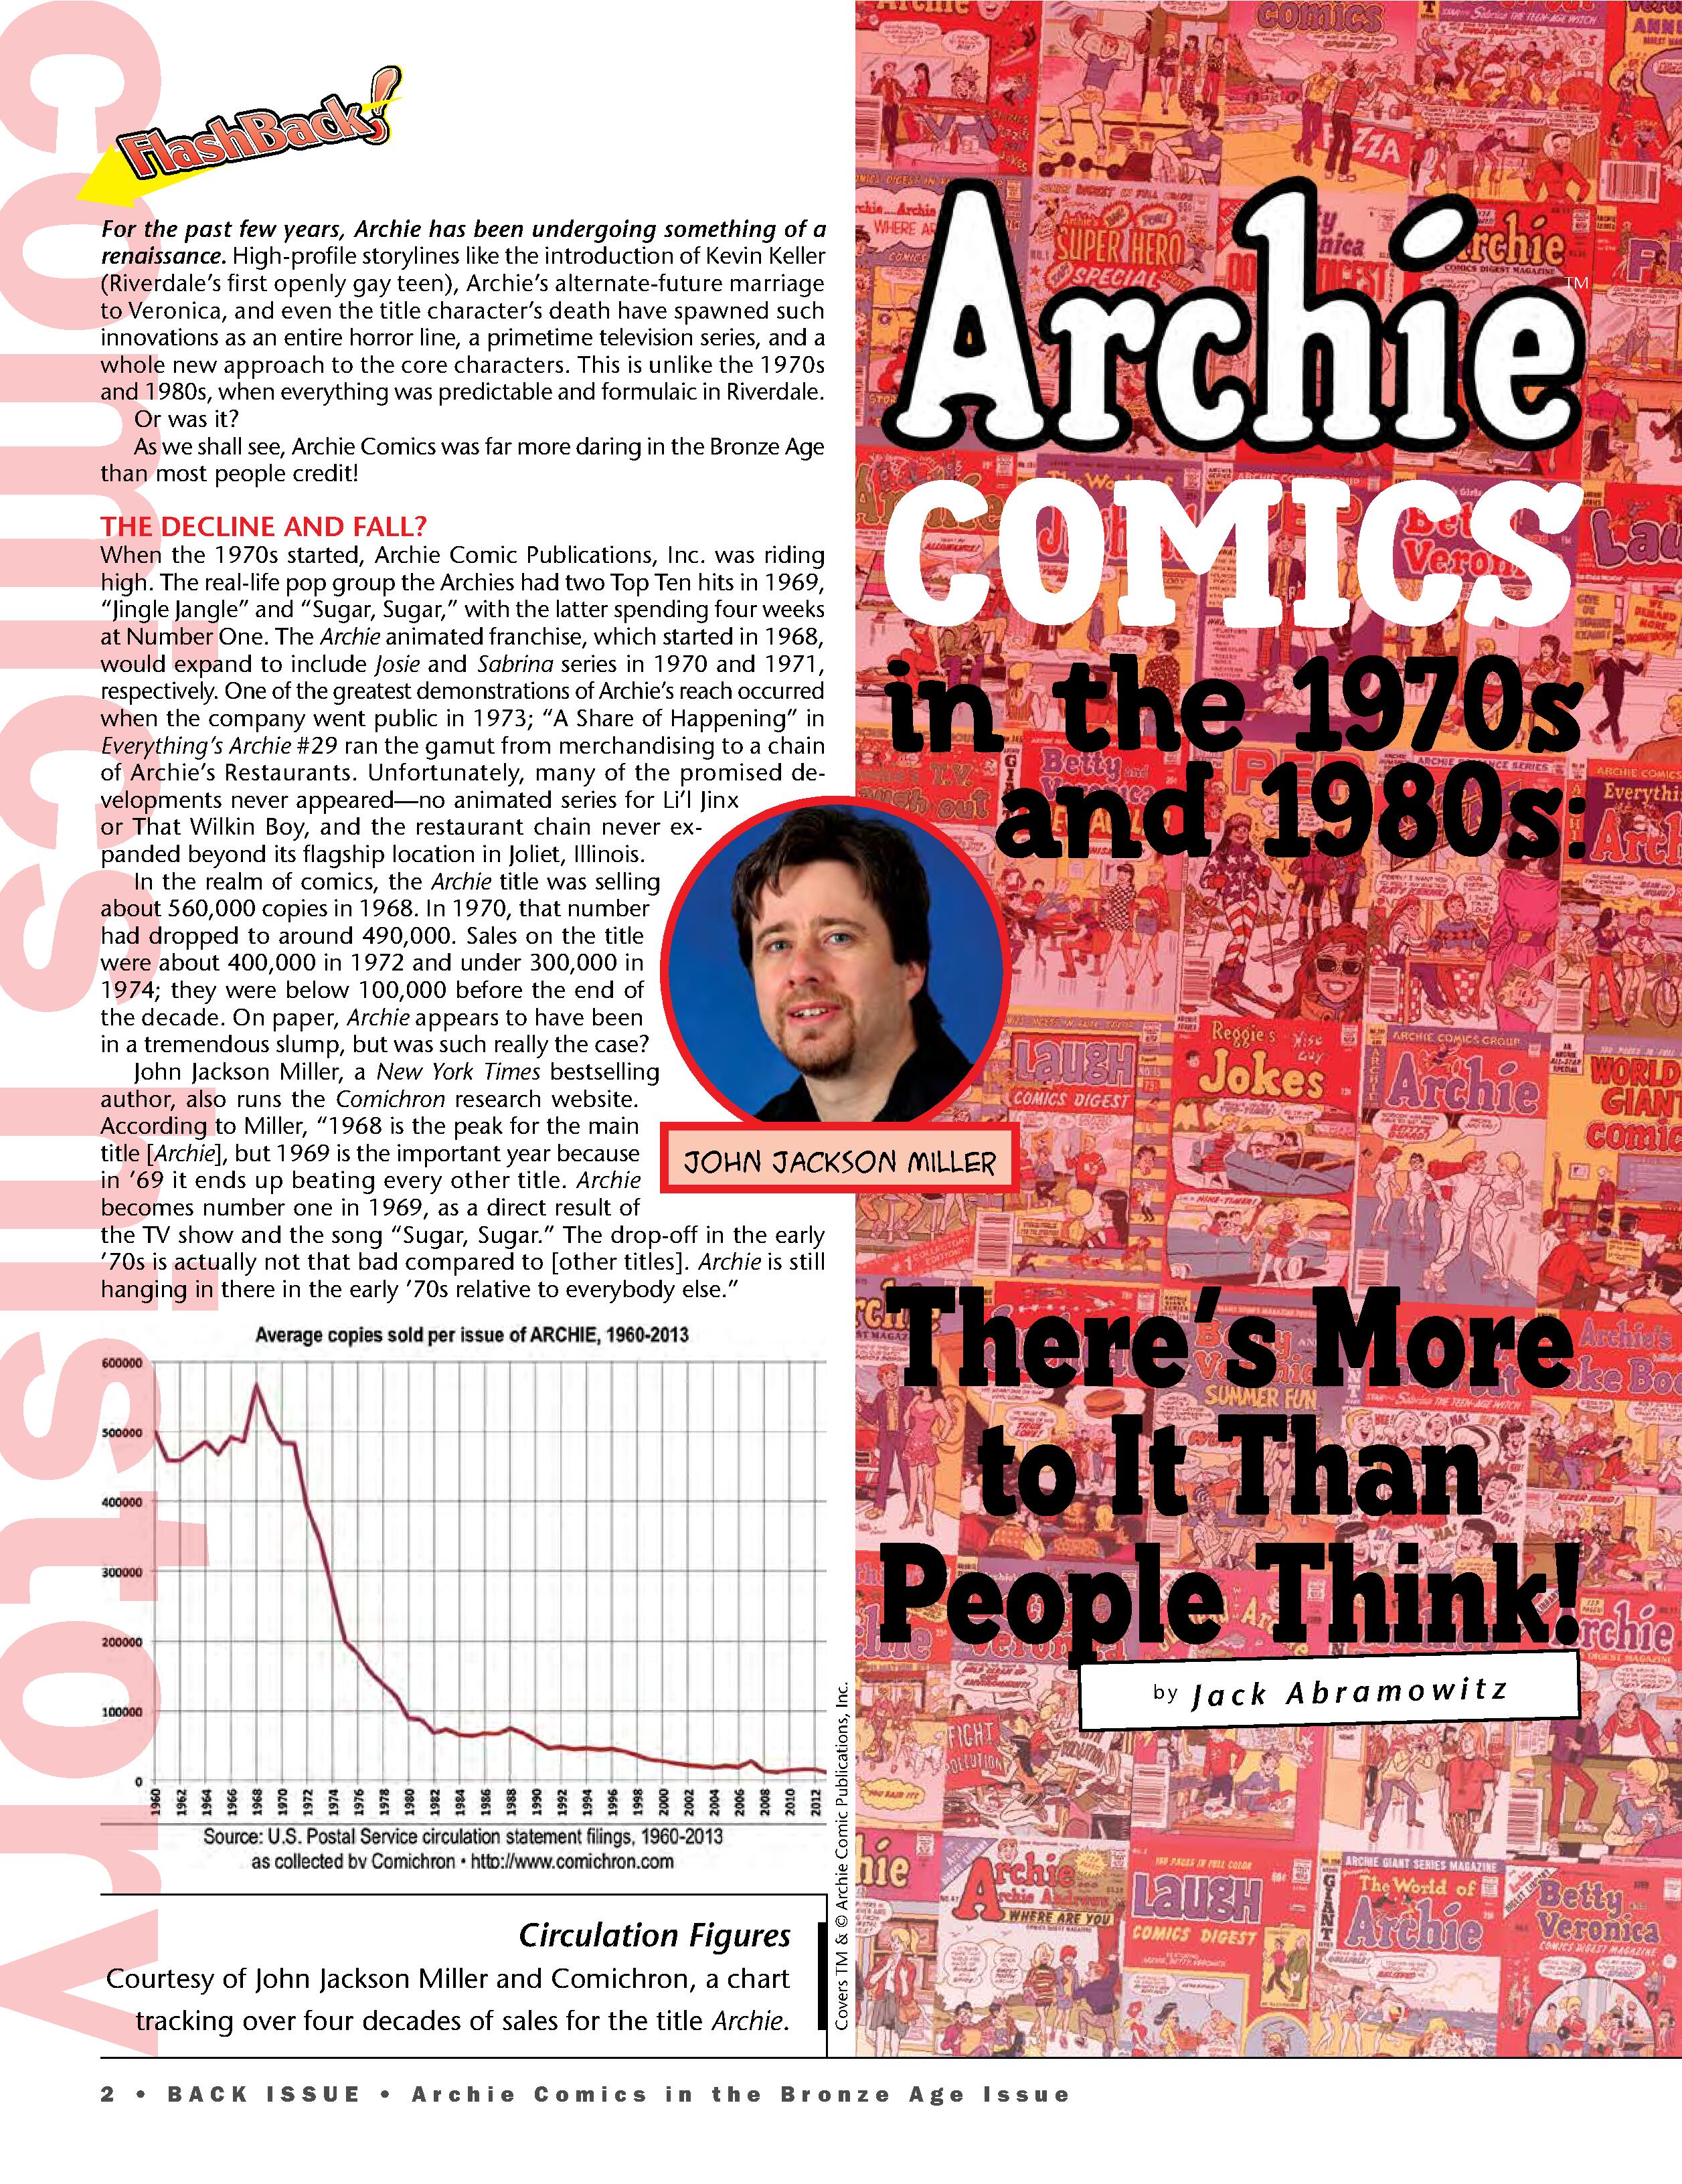 Read online Back Issue comic -  Issue #107 - 4